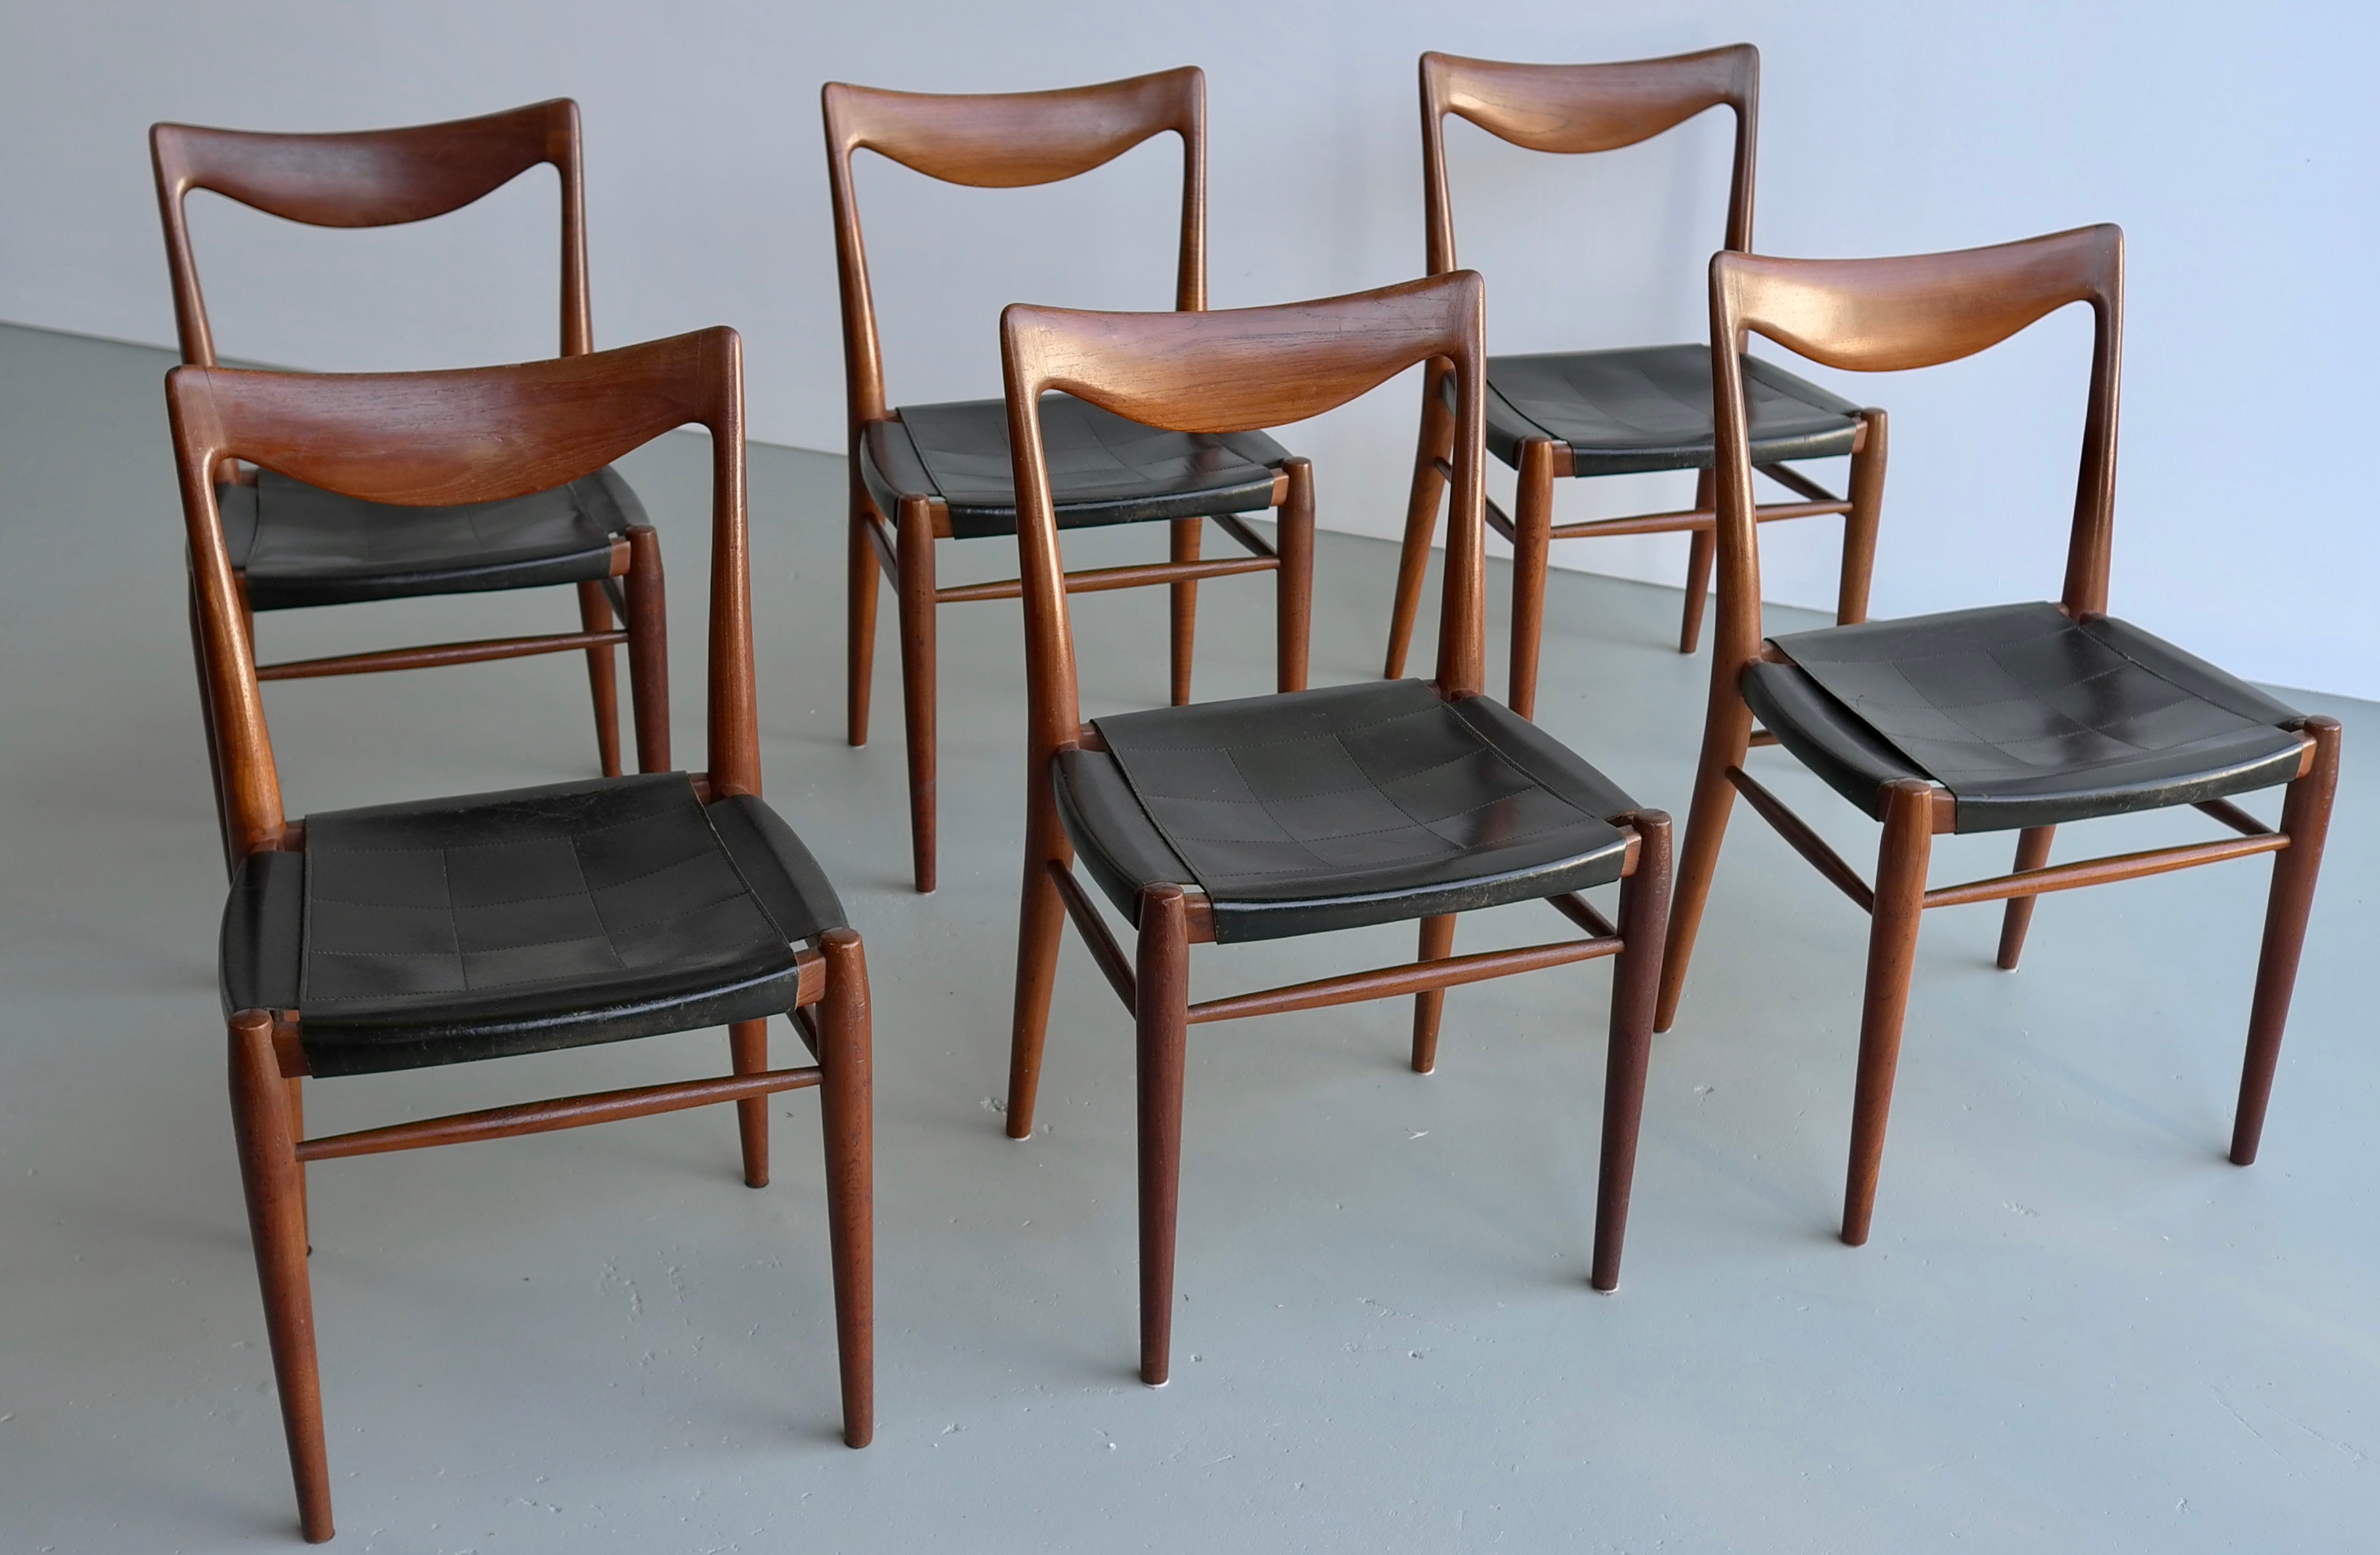 Rastad and Relling six Bambi chairs in teak and leather, Gustav Bahus, 1960s.
These chairs have their original sling black leather seatings.